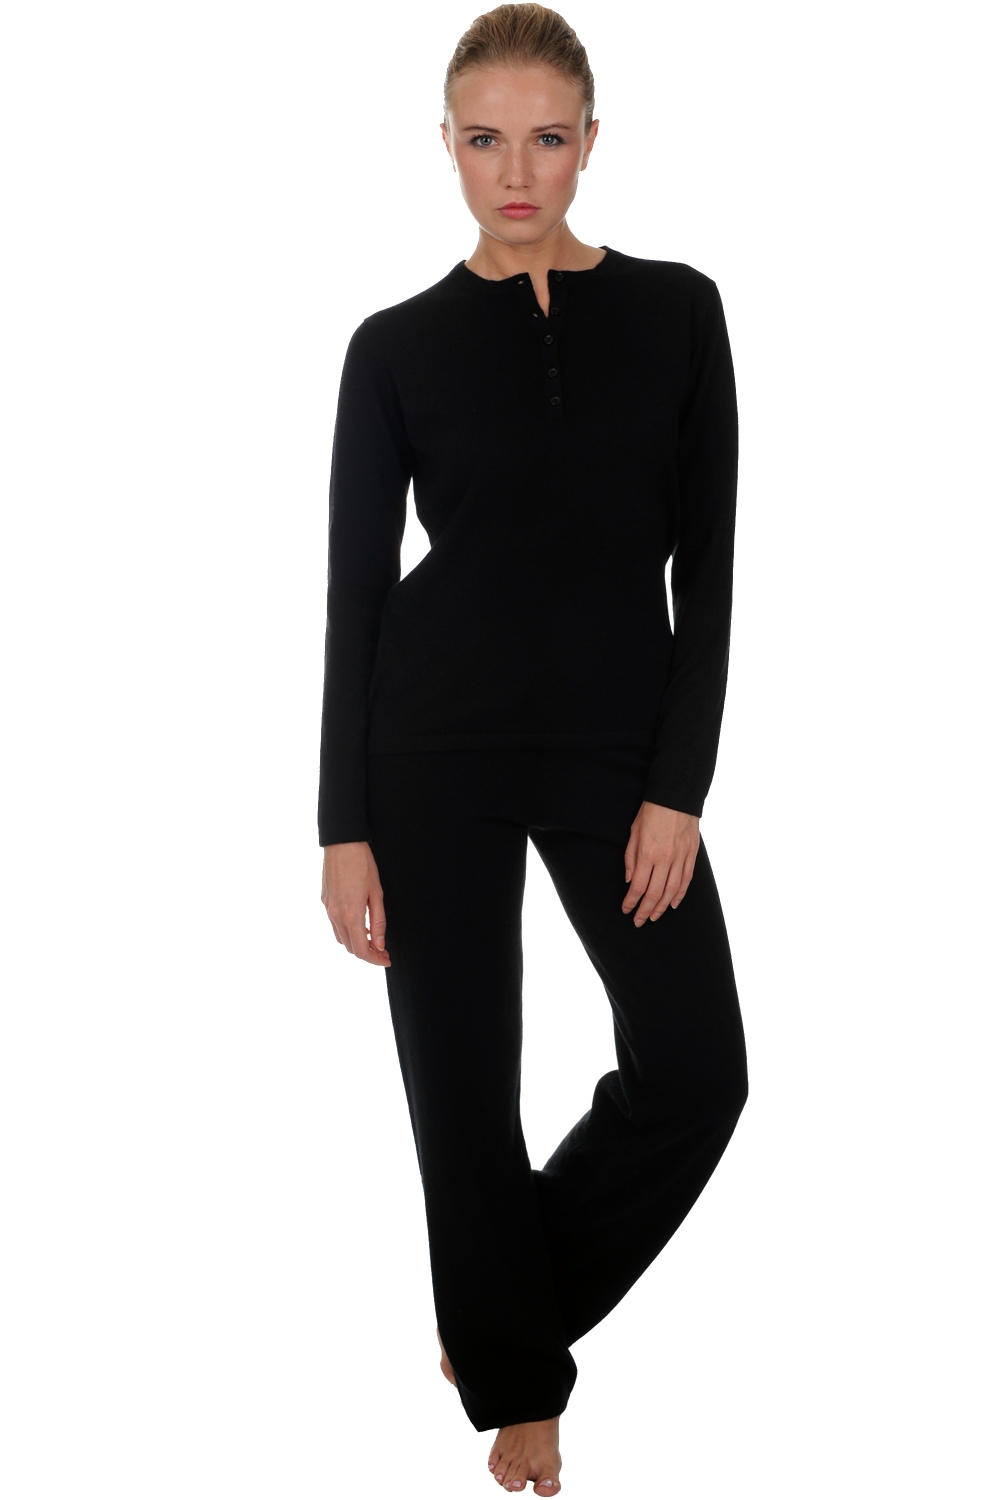 Cashmere accessories cocooning loan black m